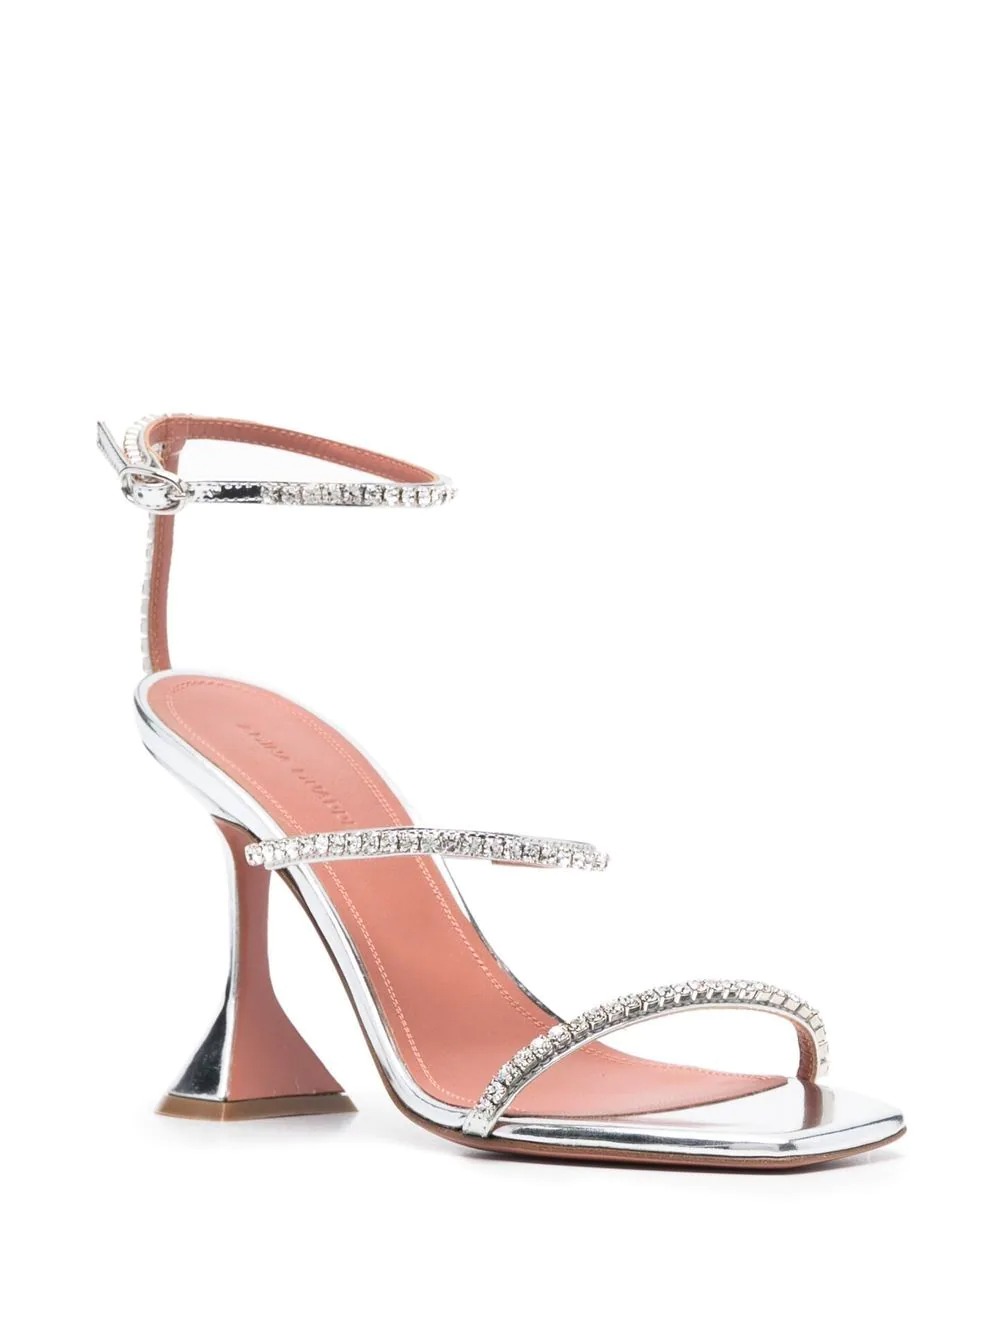 metallic strappy sandals perfect for an outdoor wedding